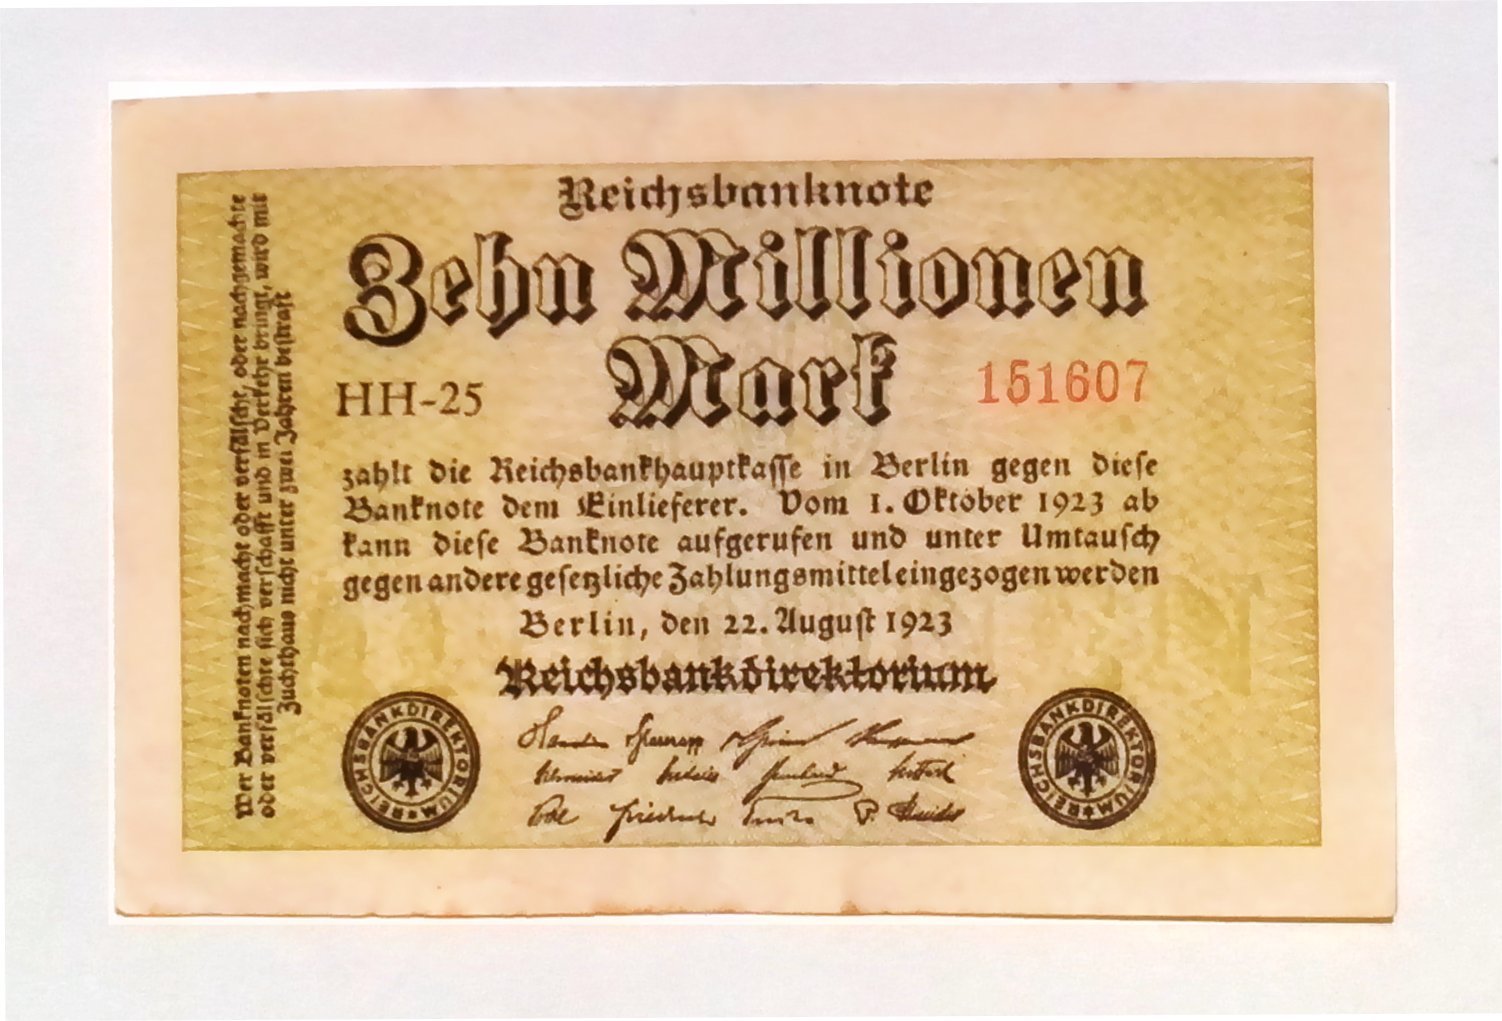 1923 Germany Hyper Inflation Full set of Authentic notes 1 to 100 Million Mark Banknotes (Build Your Own Collection)